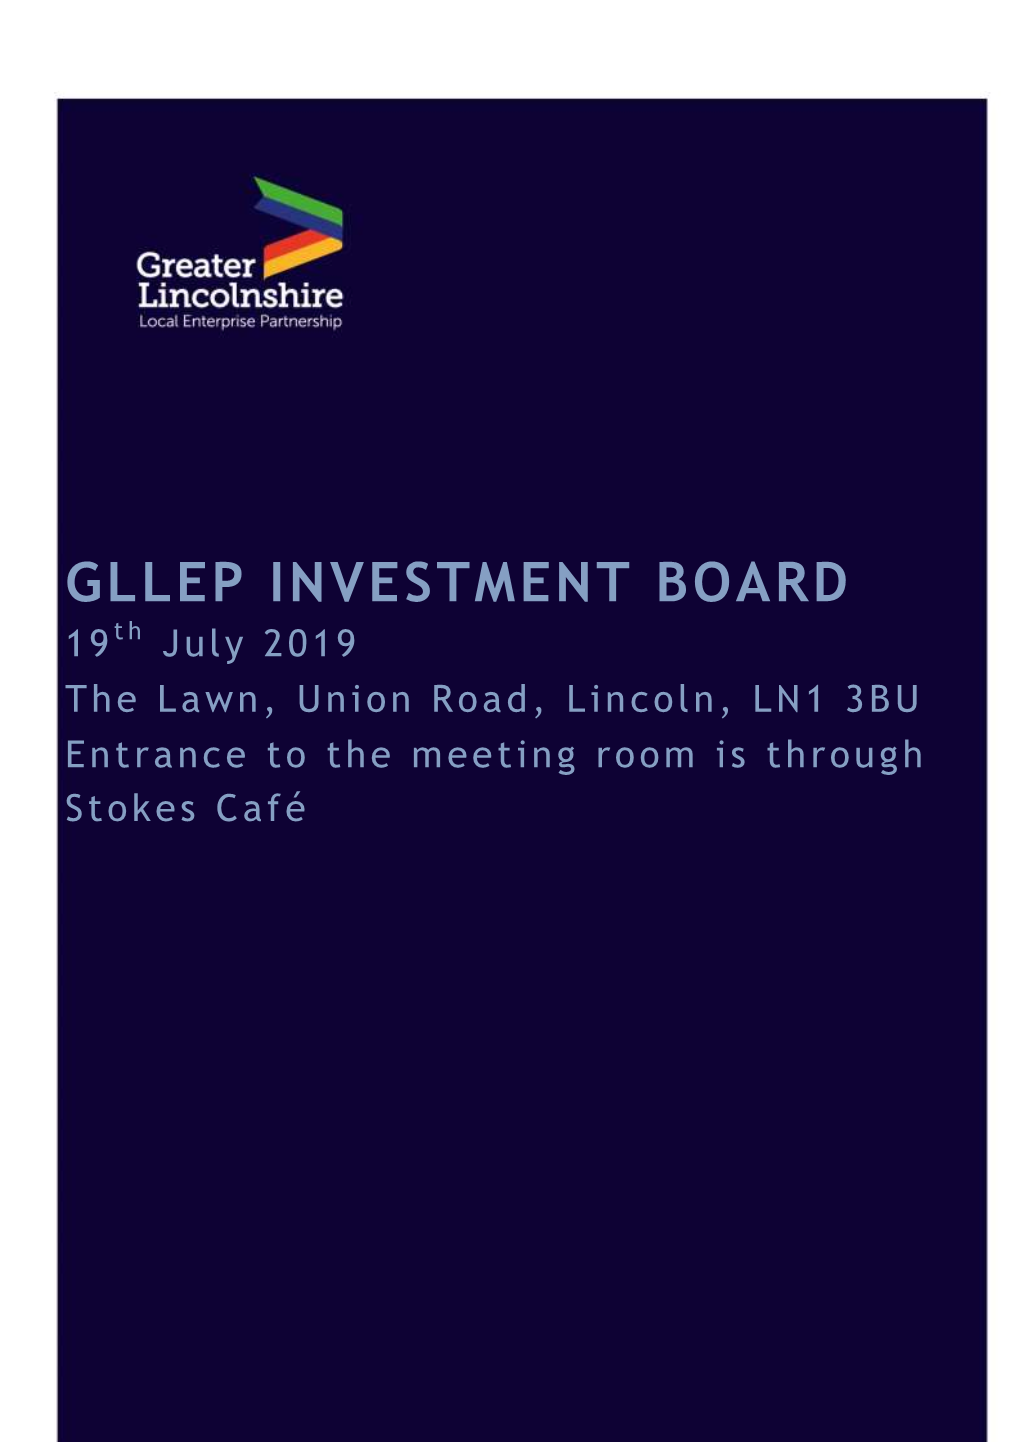 GLLEP INVESTMENT BOARD 19 Th July 2019 the Lawn, Union Road, Lincoln, LN 1 3BU Entrance to the Meeting Room Is Through Stokes Café Paper 0 - Agenda